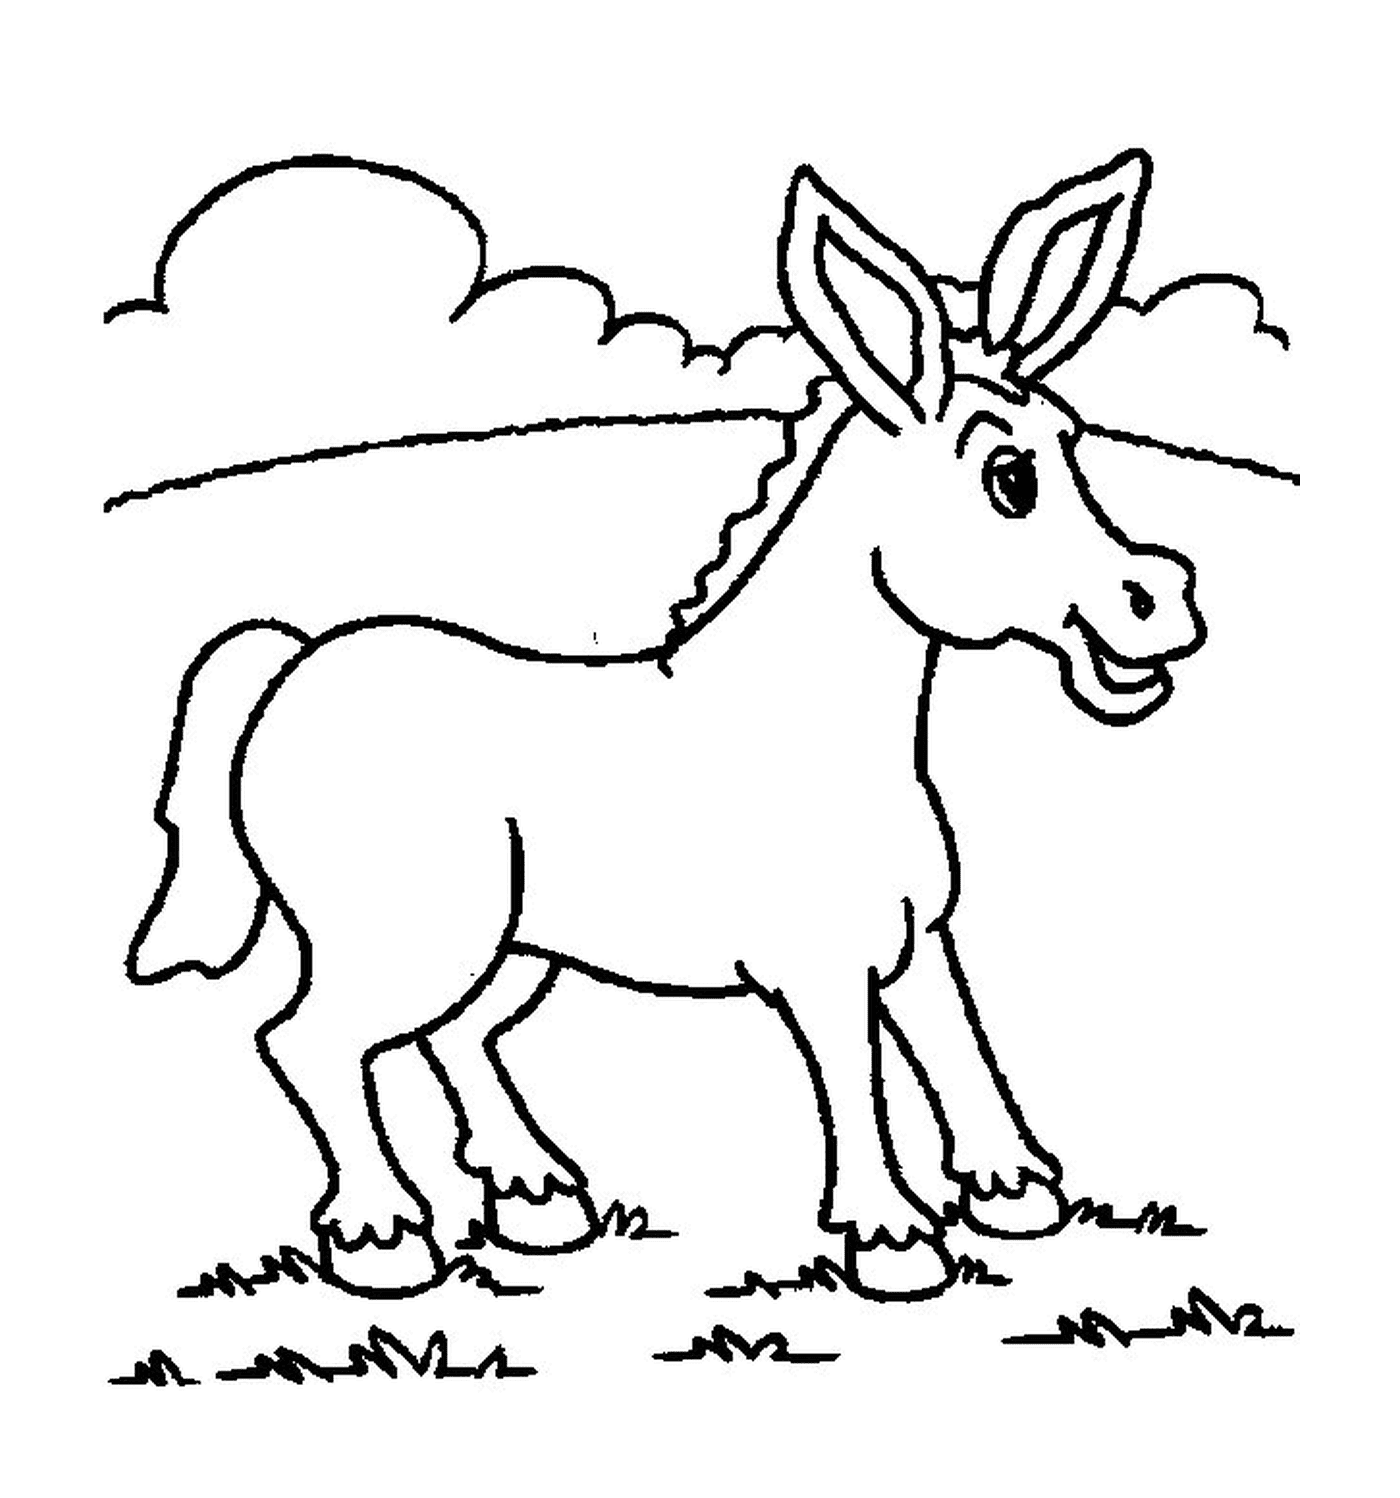  An image of a donkey 